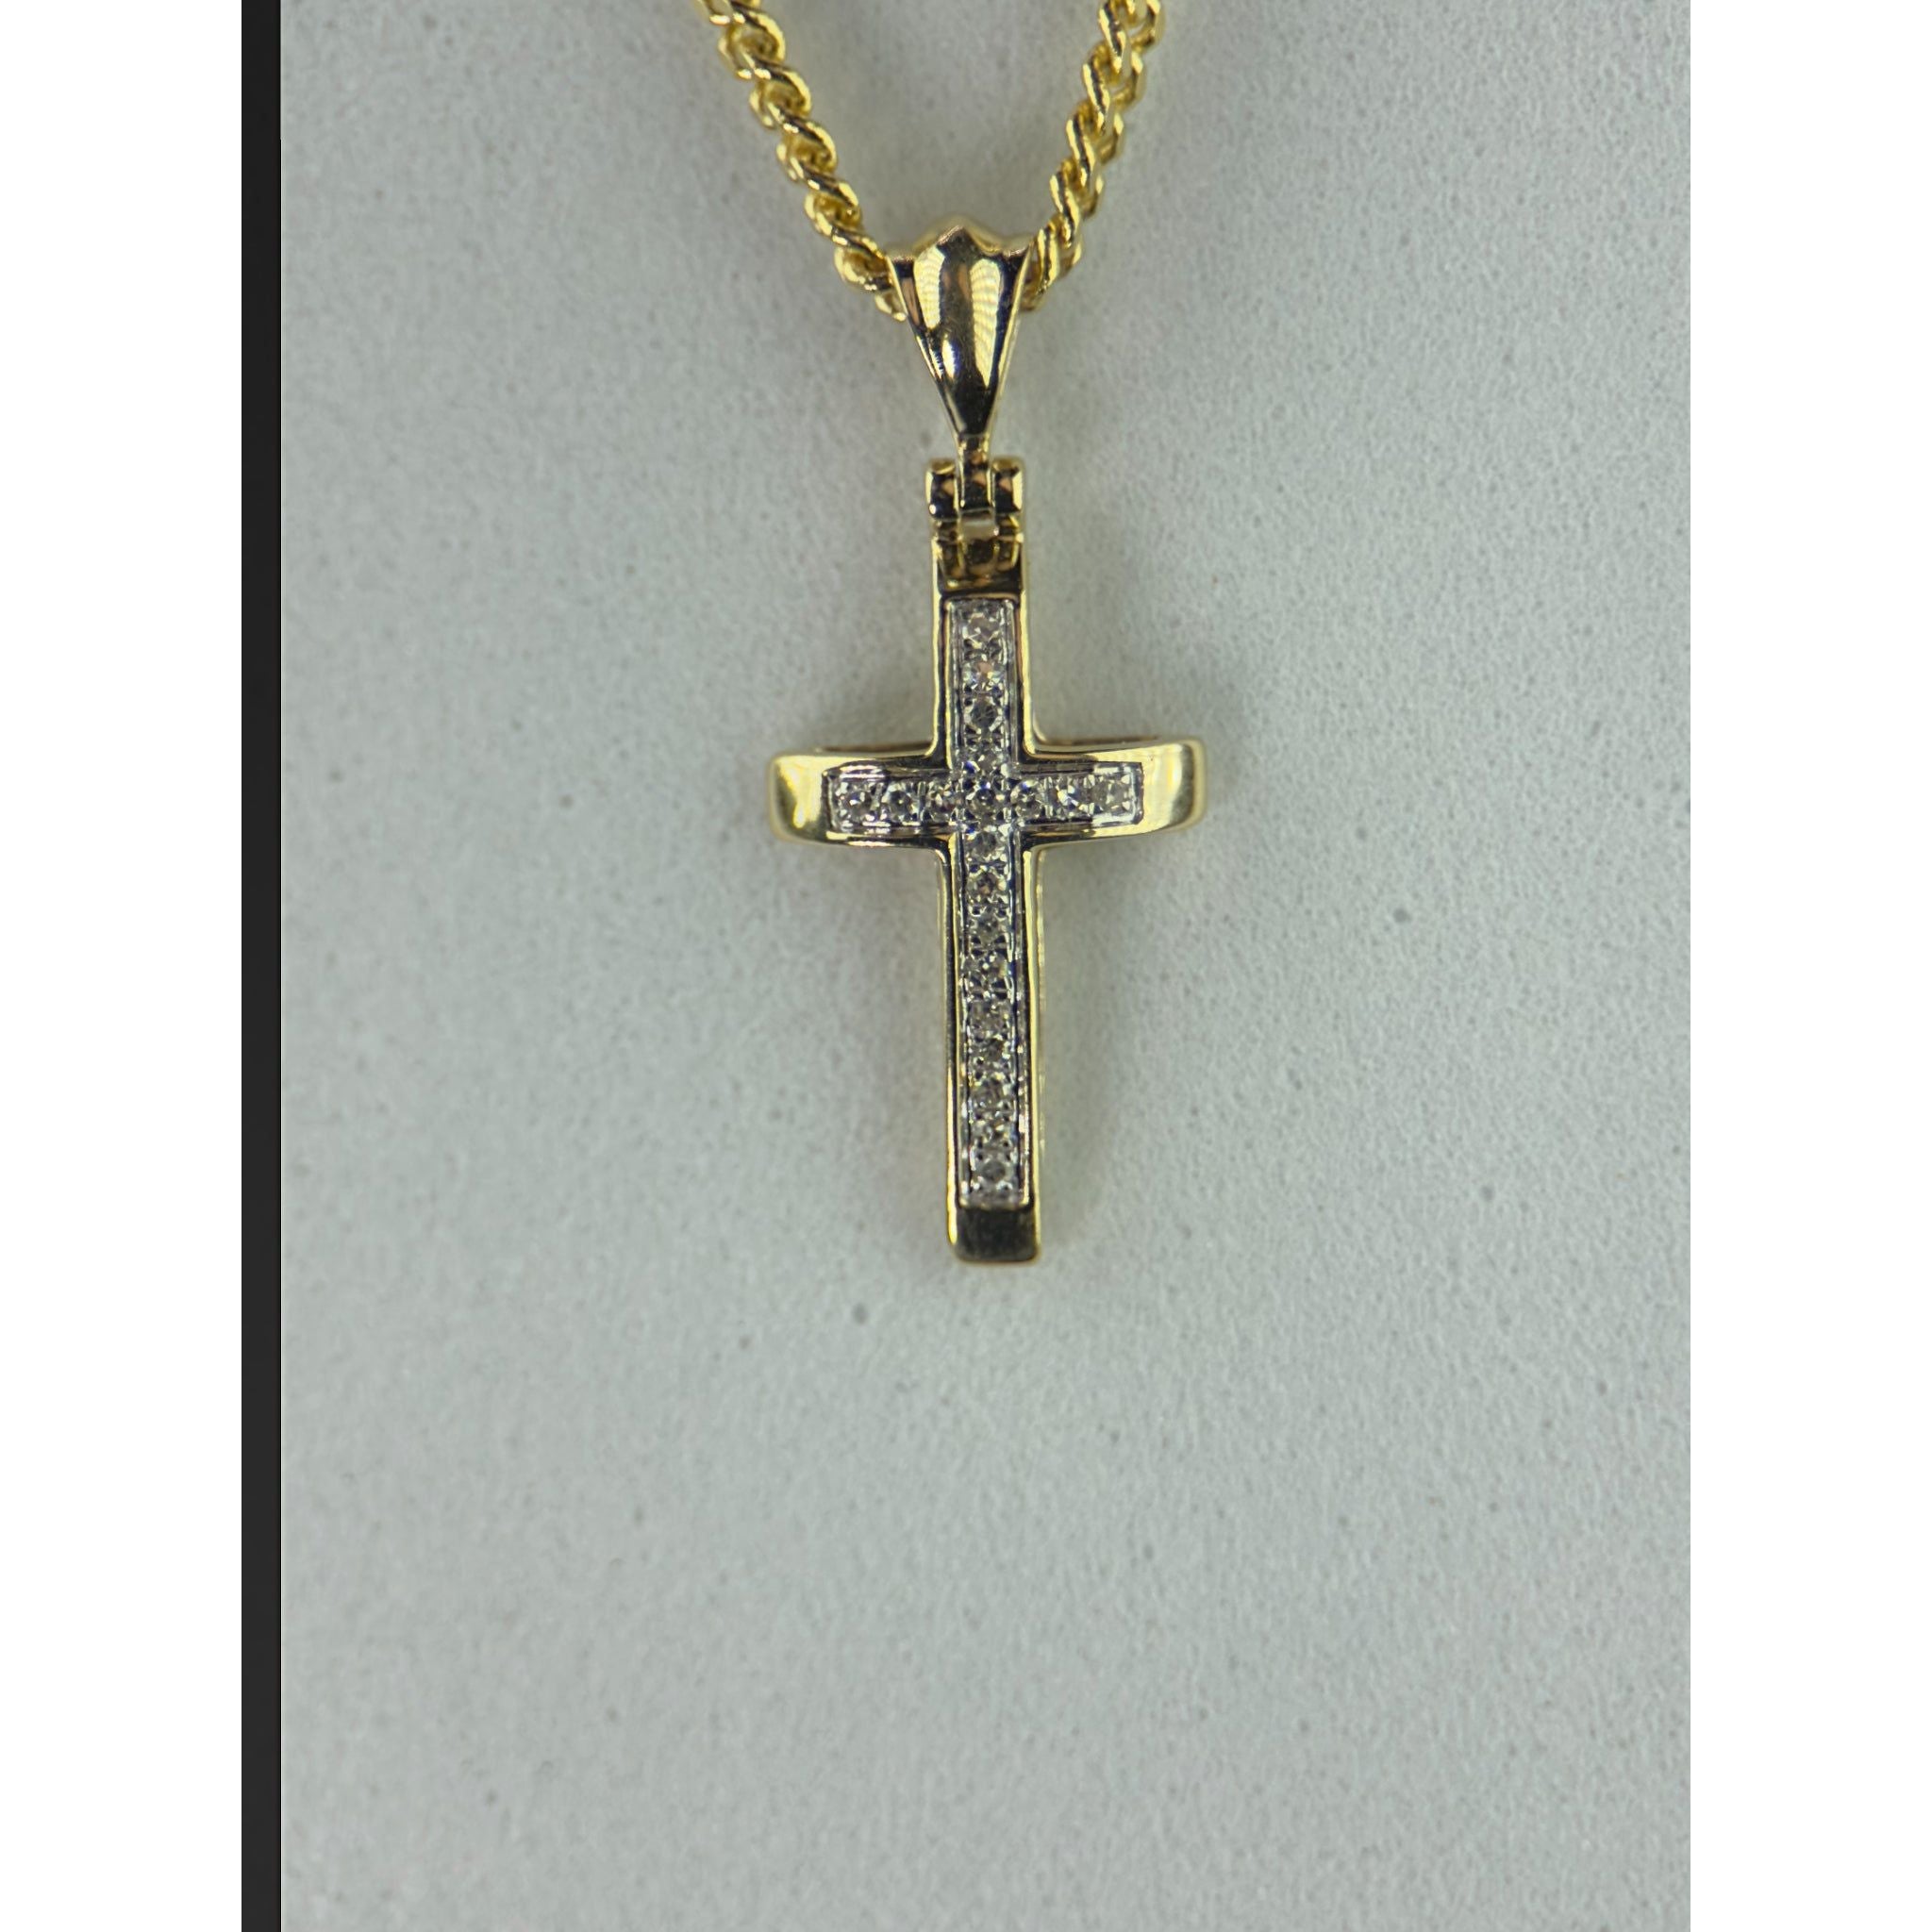 DR2213 - 14K Yellow Gold - Diamond - Pendant and Chain